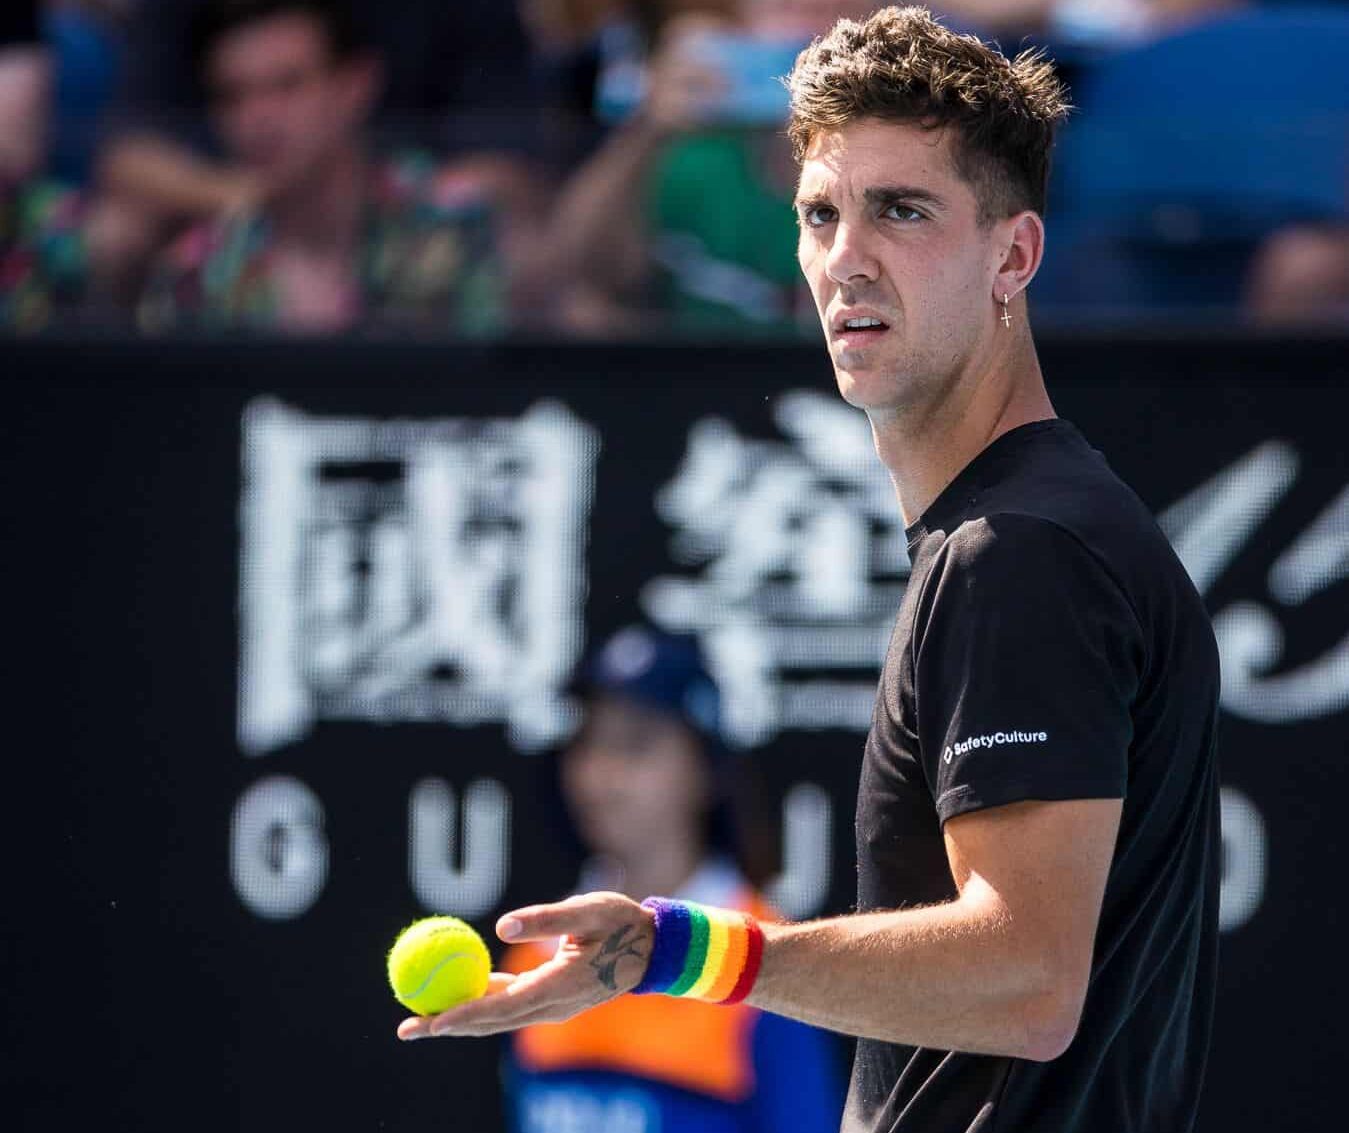 Things You May Not Know About Thanasi Kokkinakis